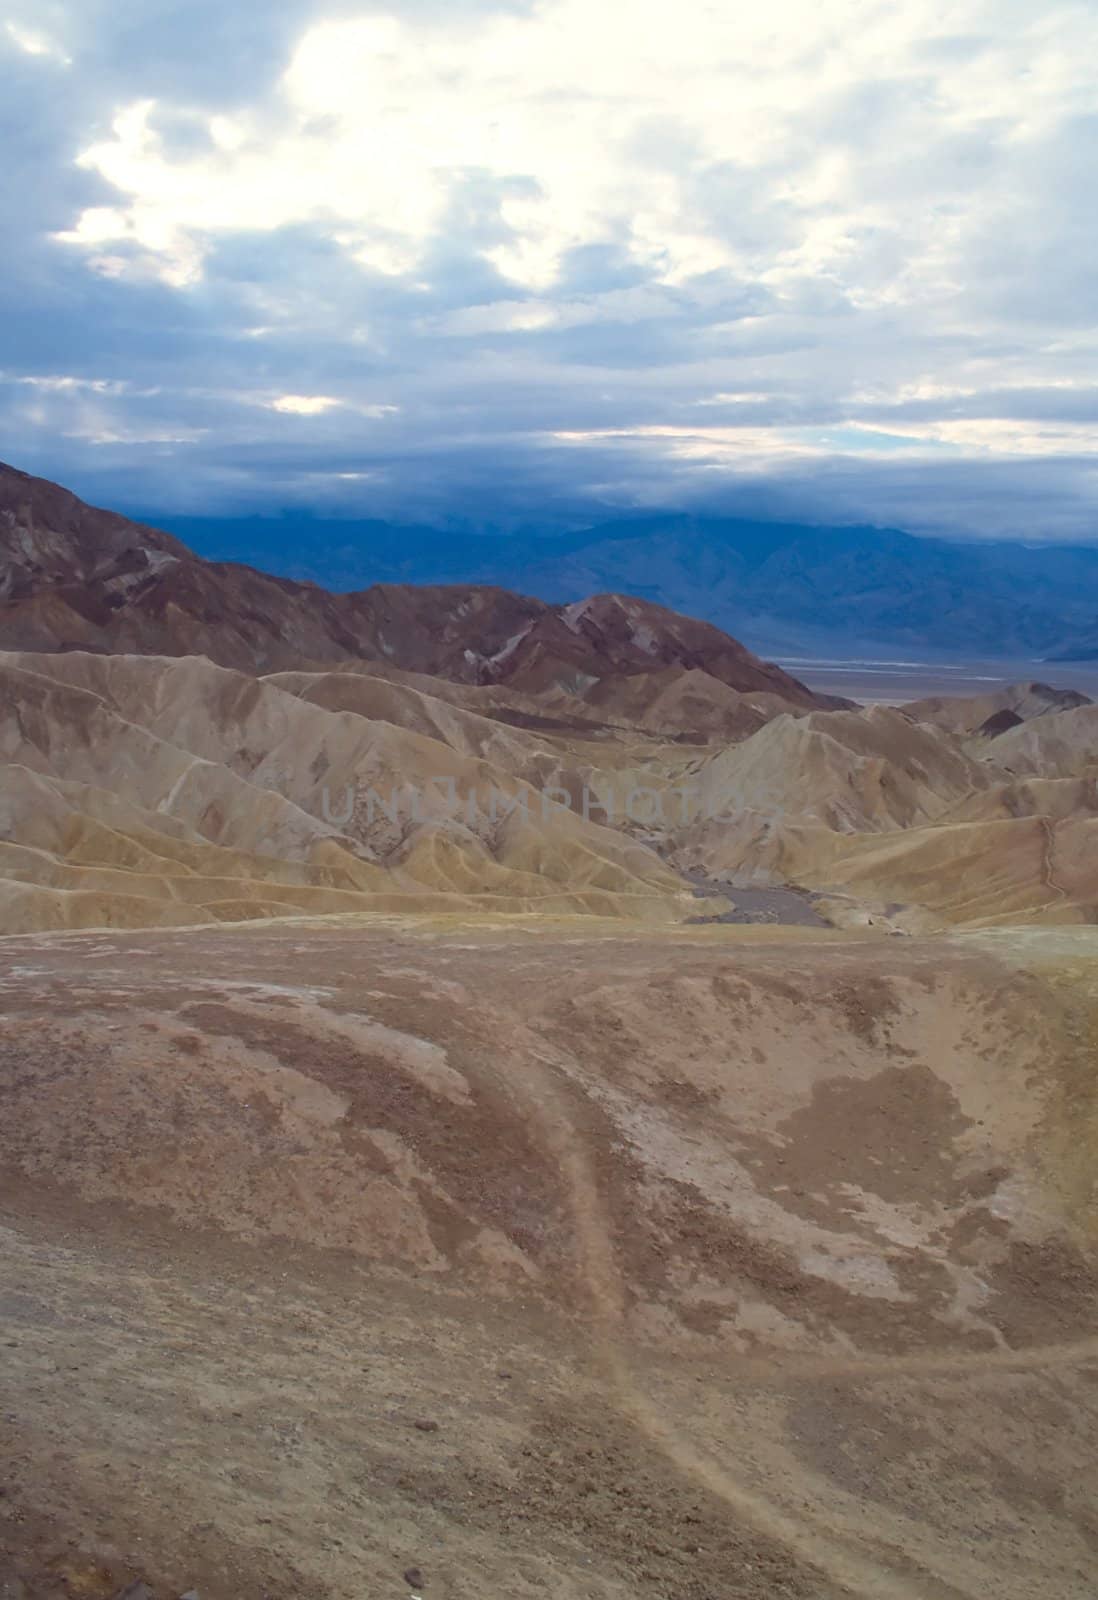 Zabriskie Point is a part of Amargosa Range located in Death Valley National Park in the United States noted for its erosional landscape.